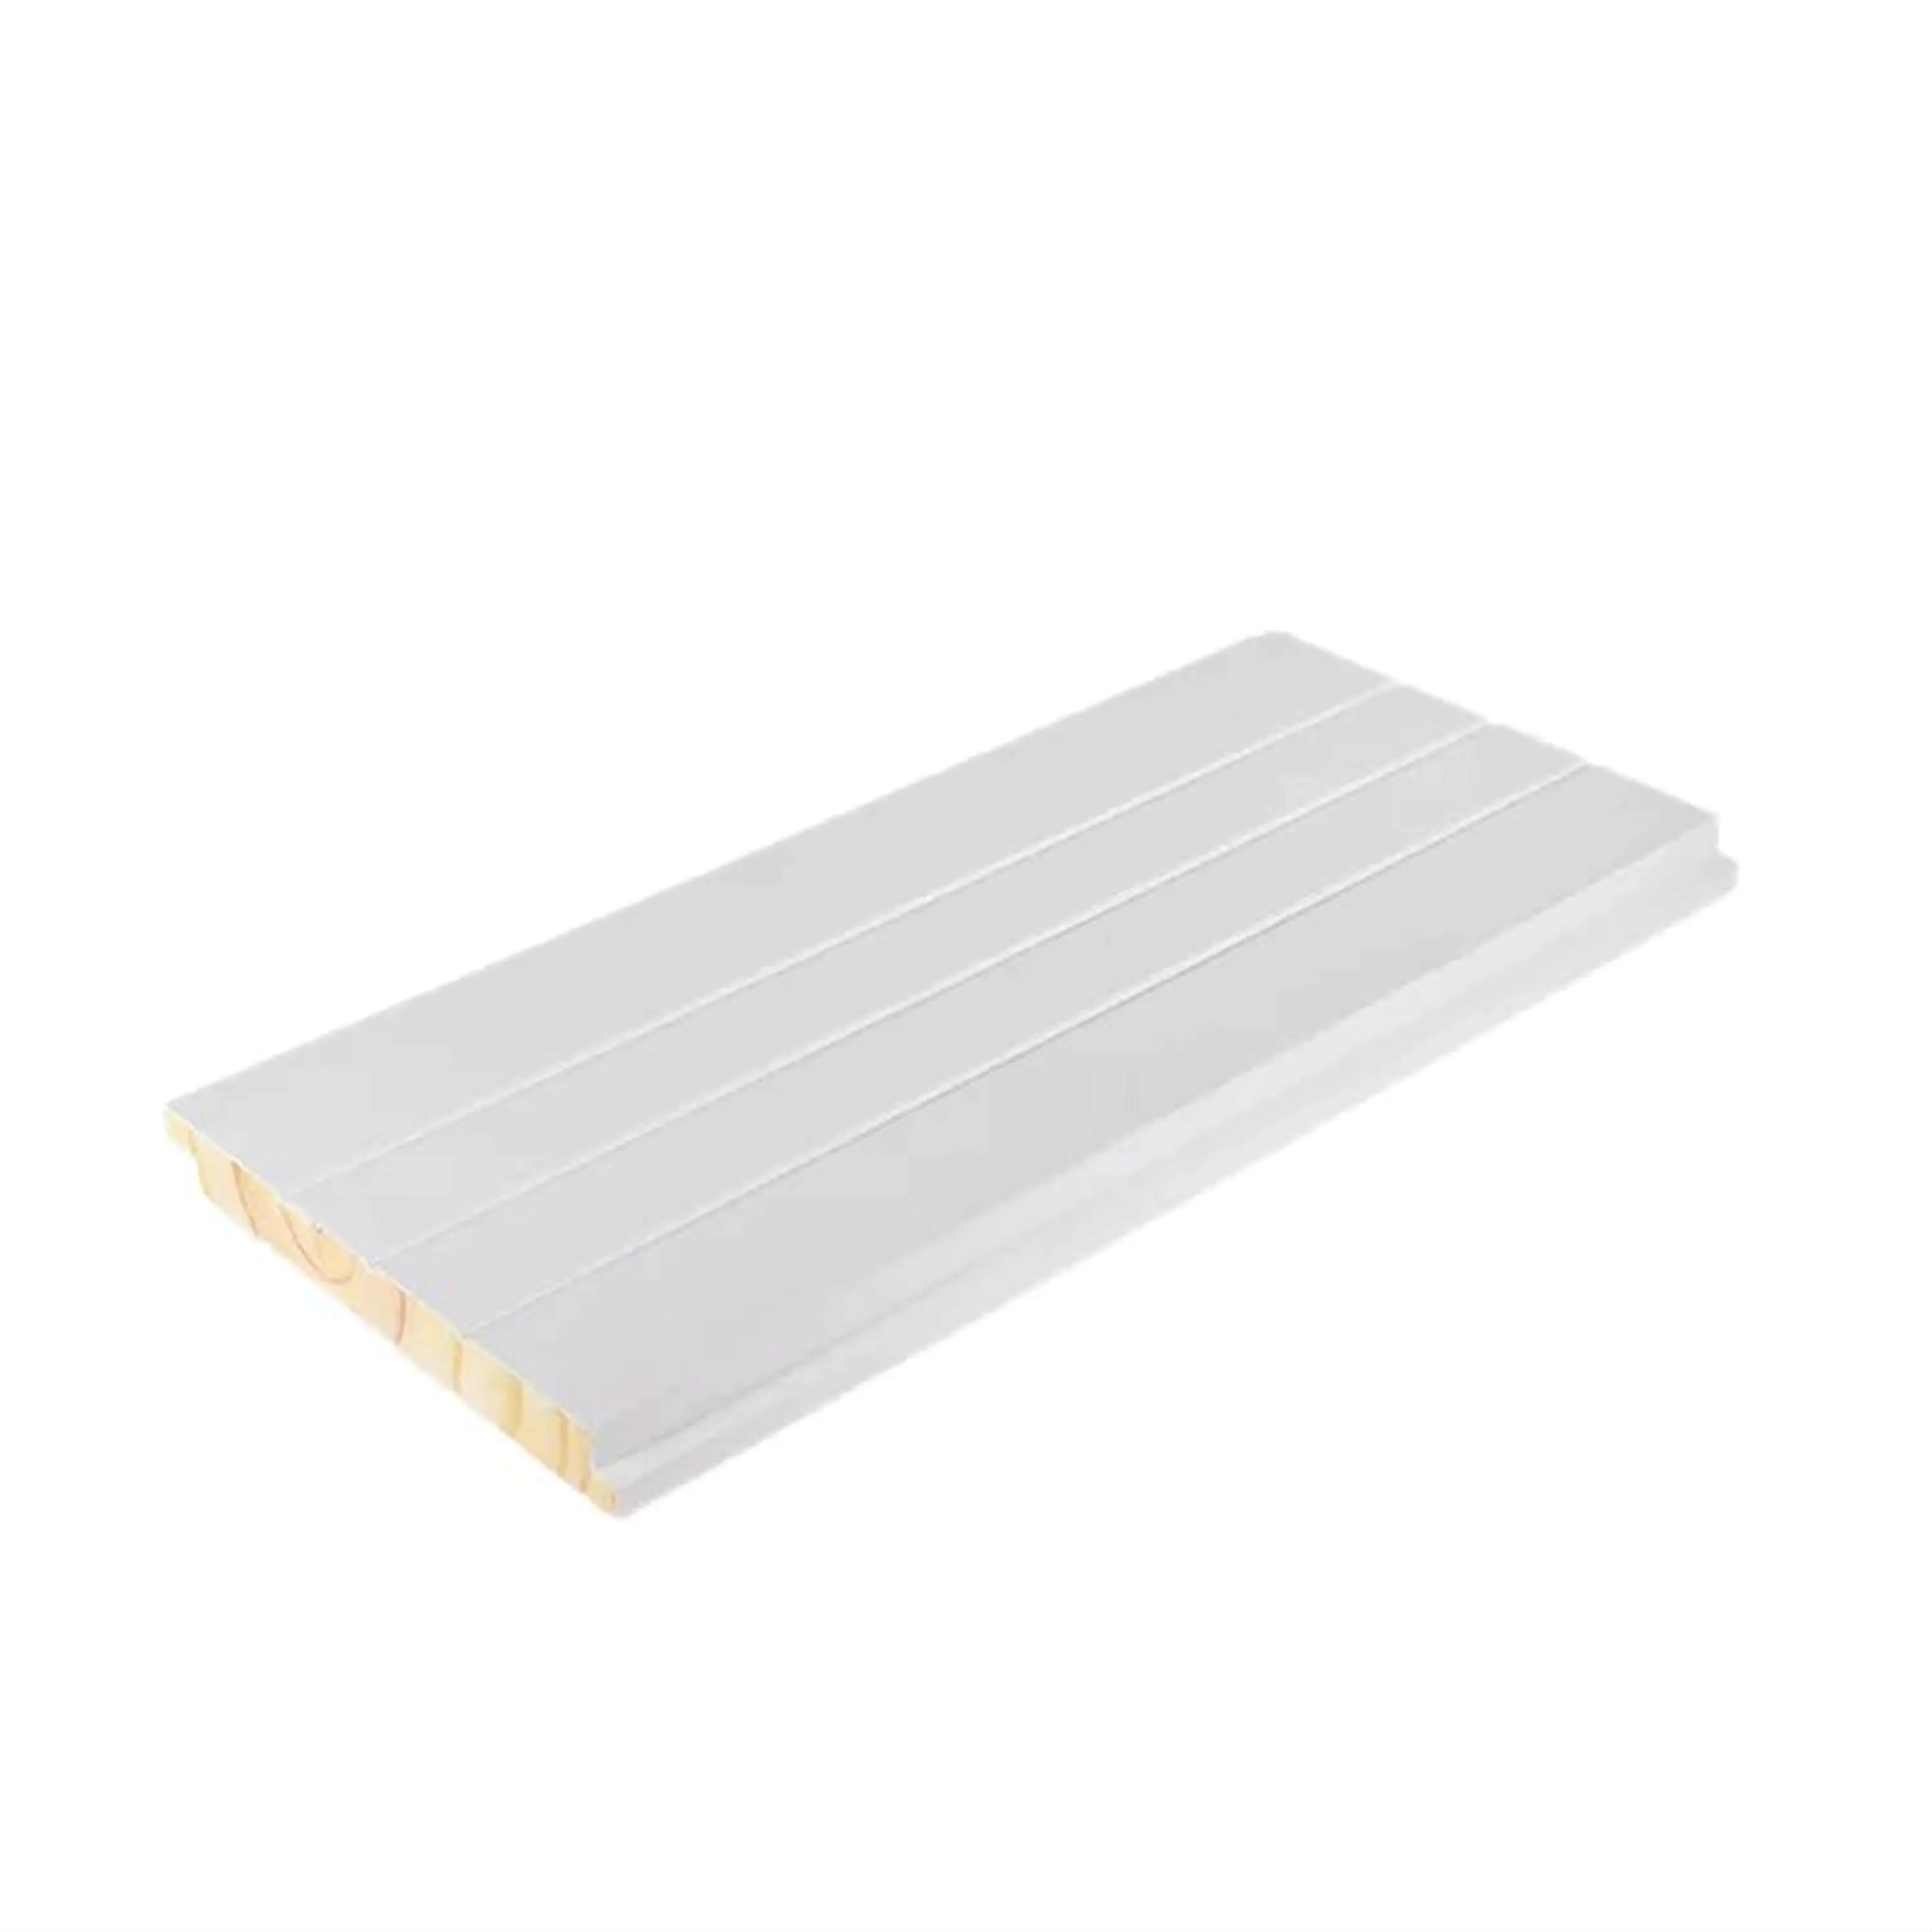 white wainscoting siding panels lvl timber easy to install walls and ceilings modern wall panels